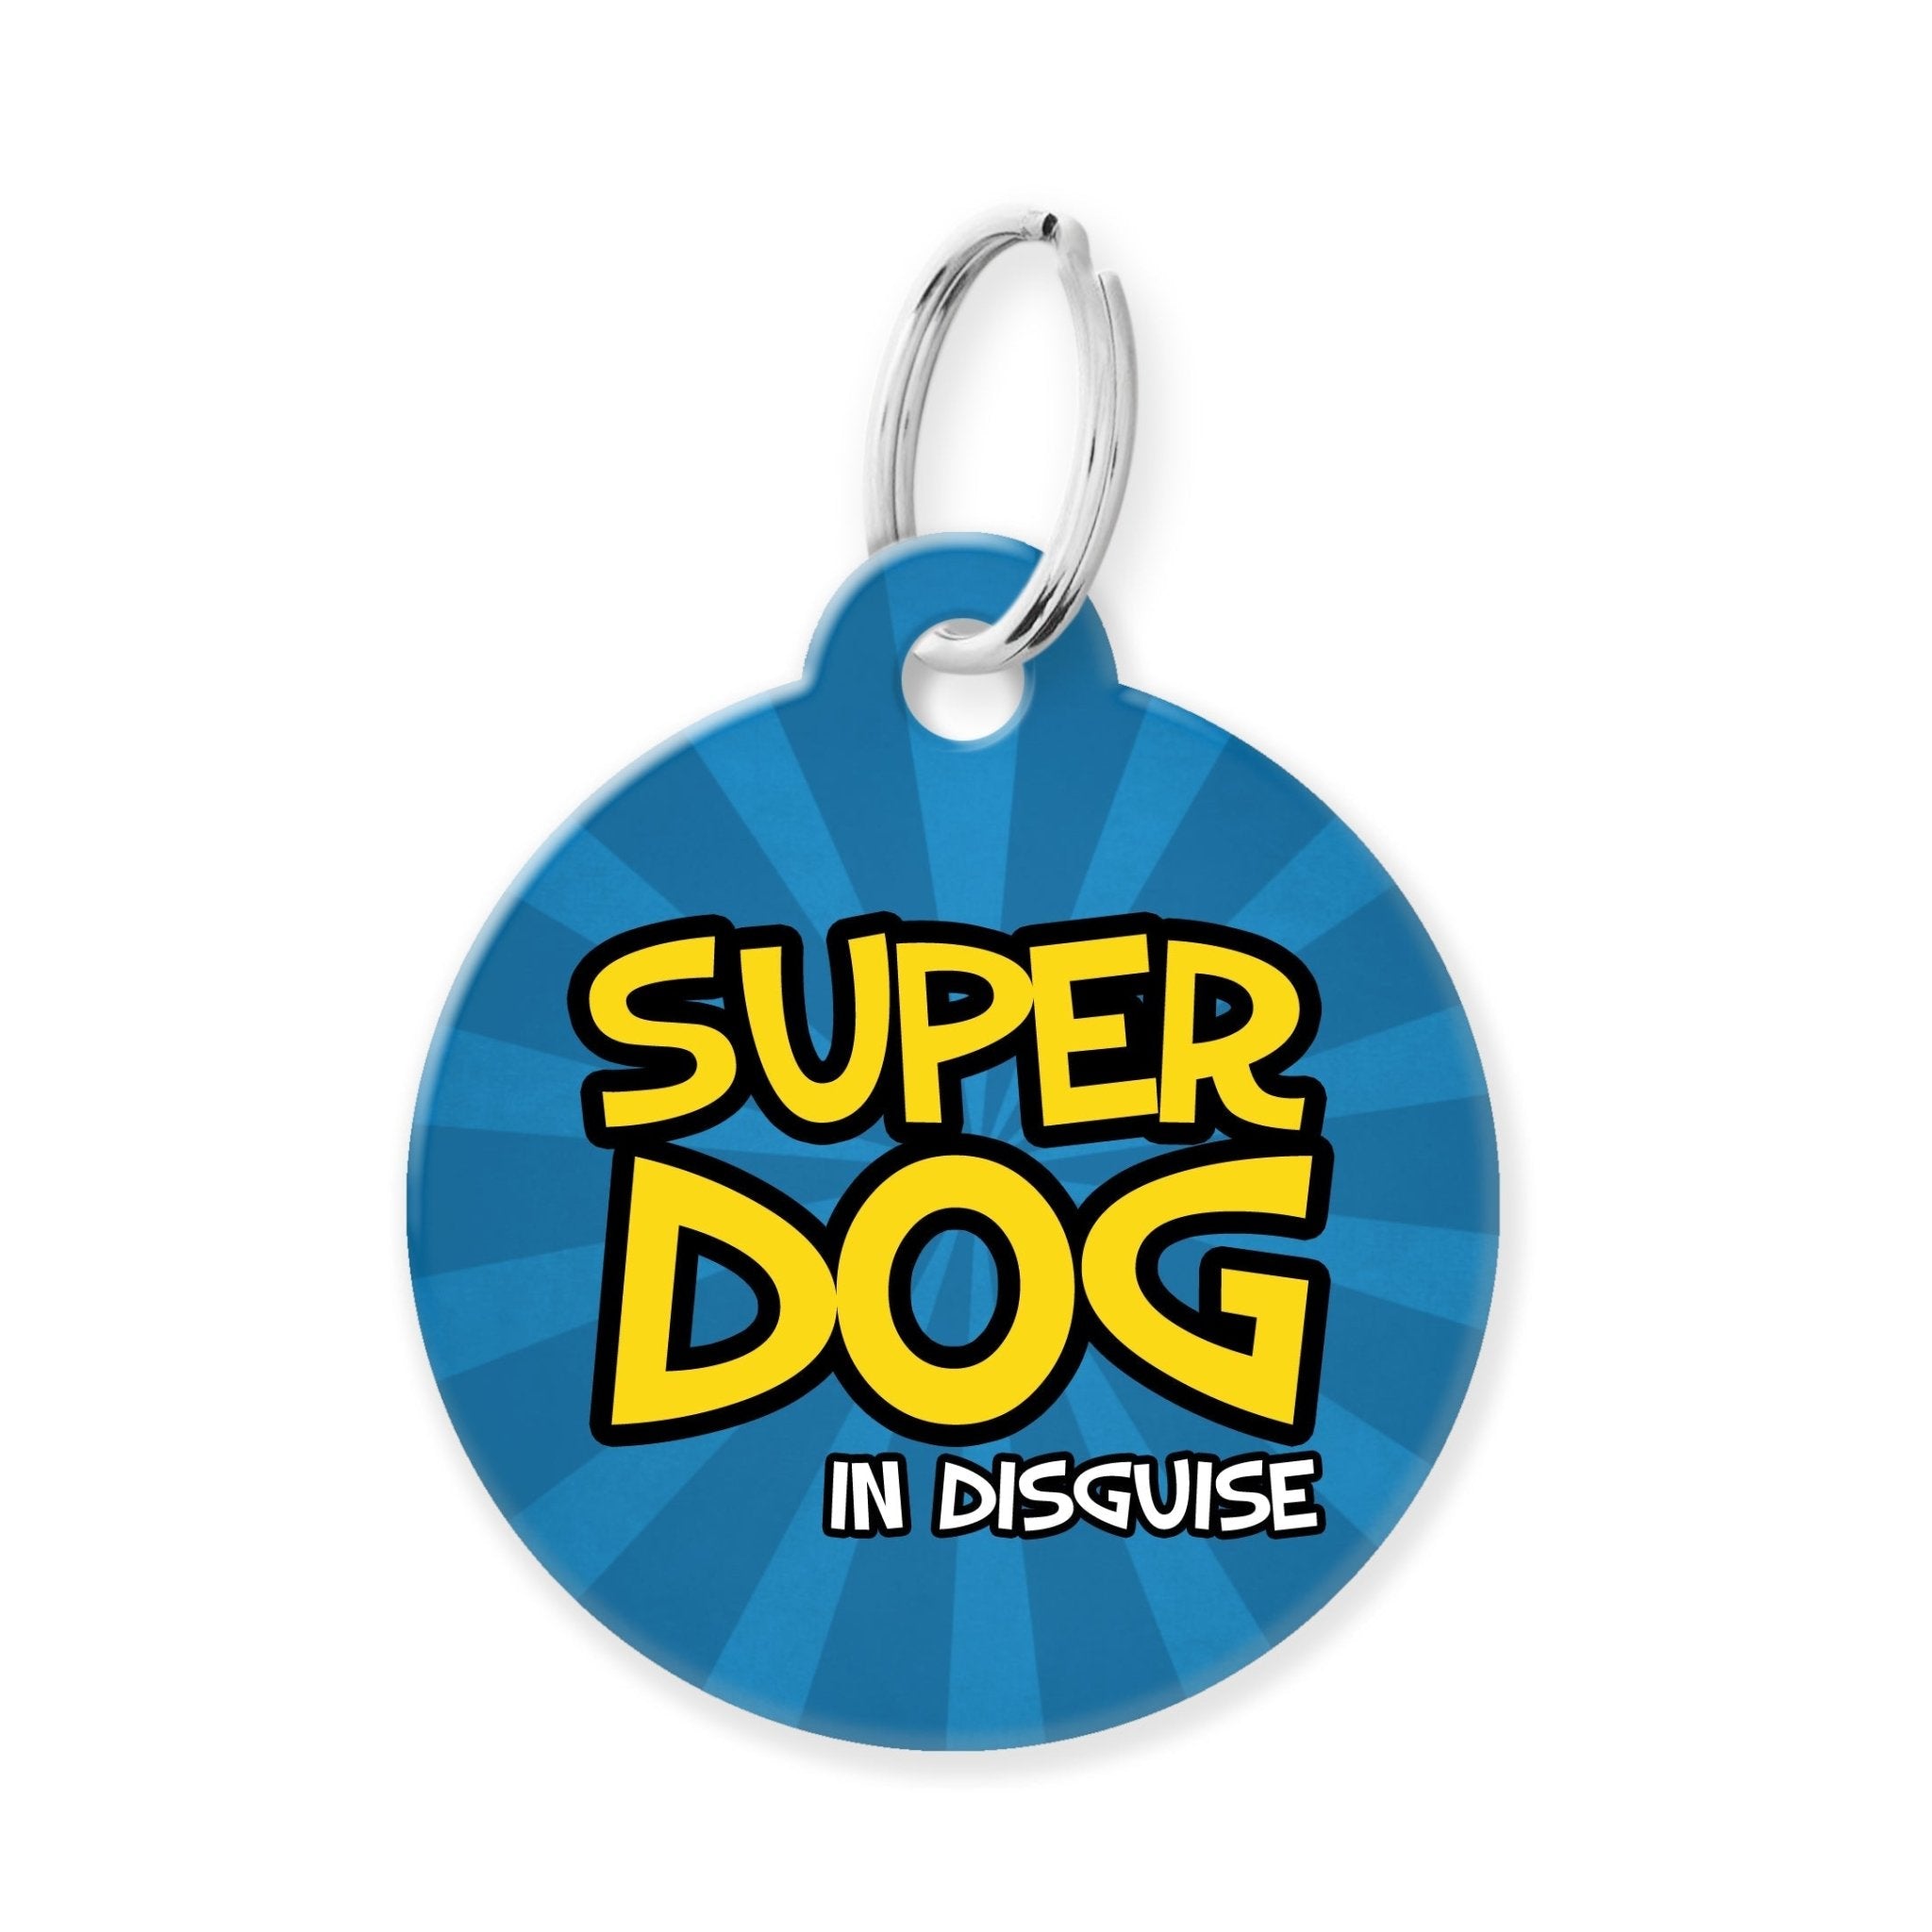 Super Dog Funny Pet Tag - The Barking Mutt